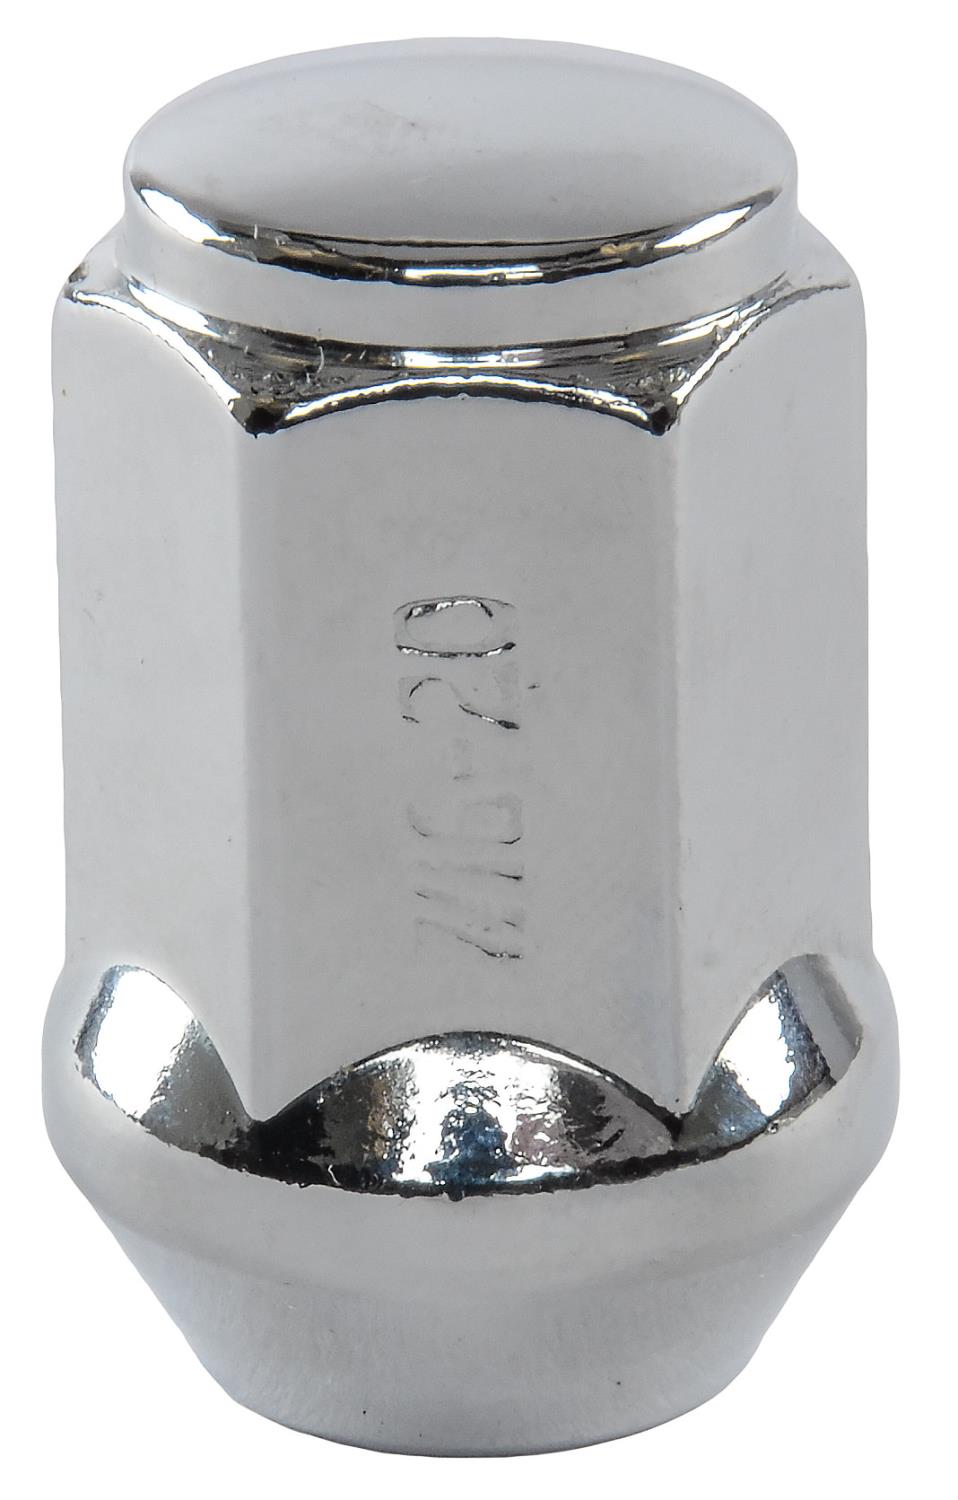 JEGS 65208: Bulge Acorn Lug Nuts Short Closed-End 1/2 in.-20 RH Thread  1.380 in. Long Steel Chrome Finish Set of JEGS